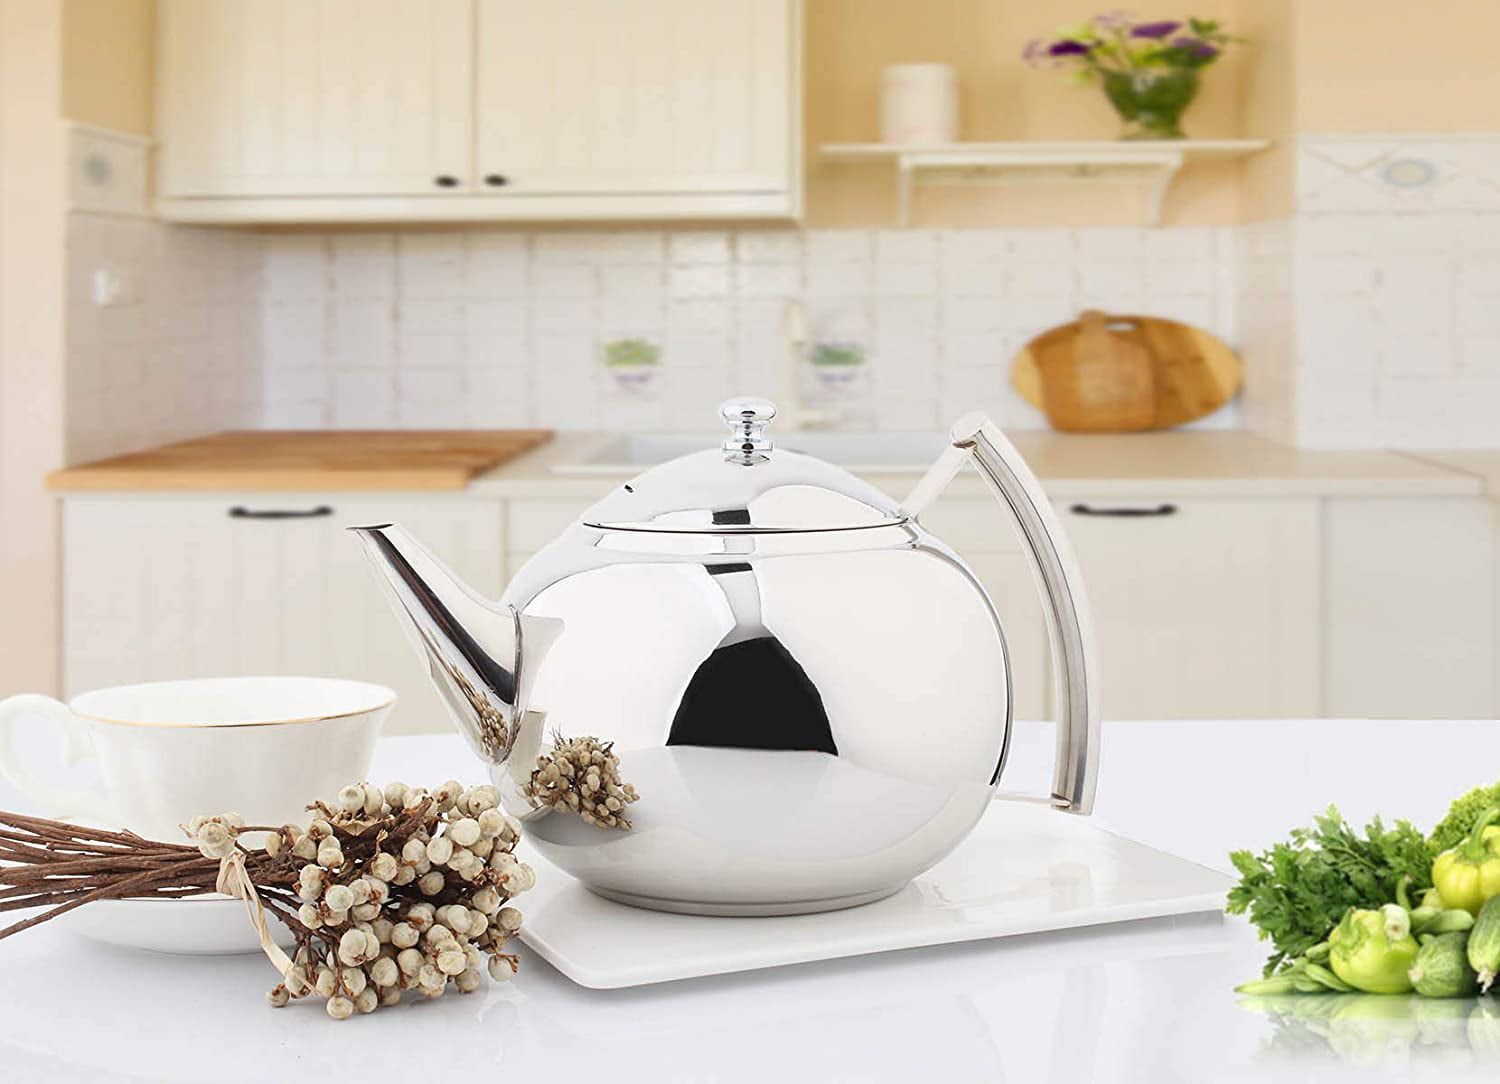 68 Ounce OMGard Teapot with Infuser Loose Tea Leaf 2 Liter Stainless Steel Tea Pot Coffee Water Small Kettle Filter Set Warmer Teakettle for Stovetop Induction Stove Top 2.1 Quart 